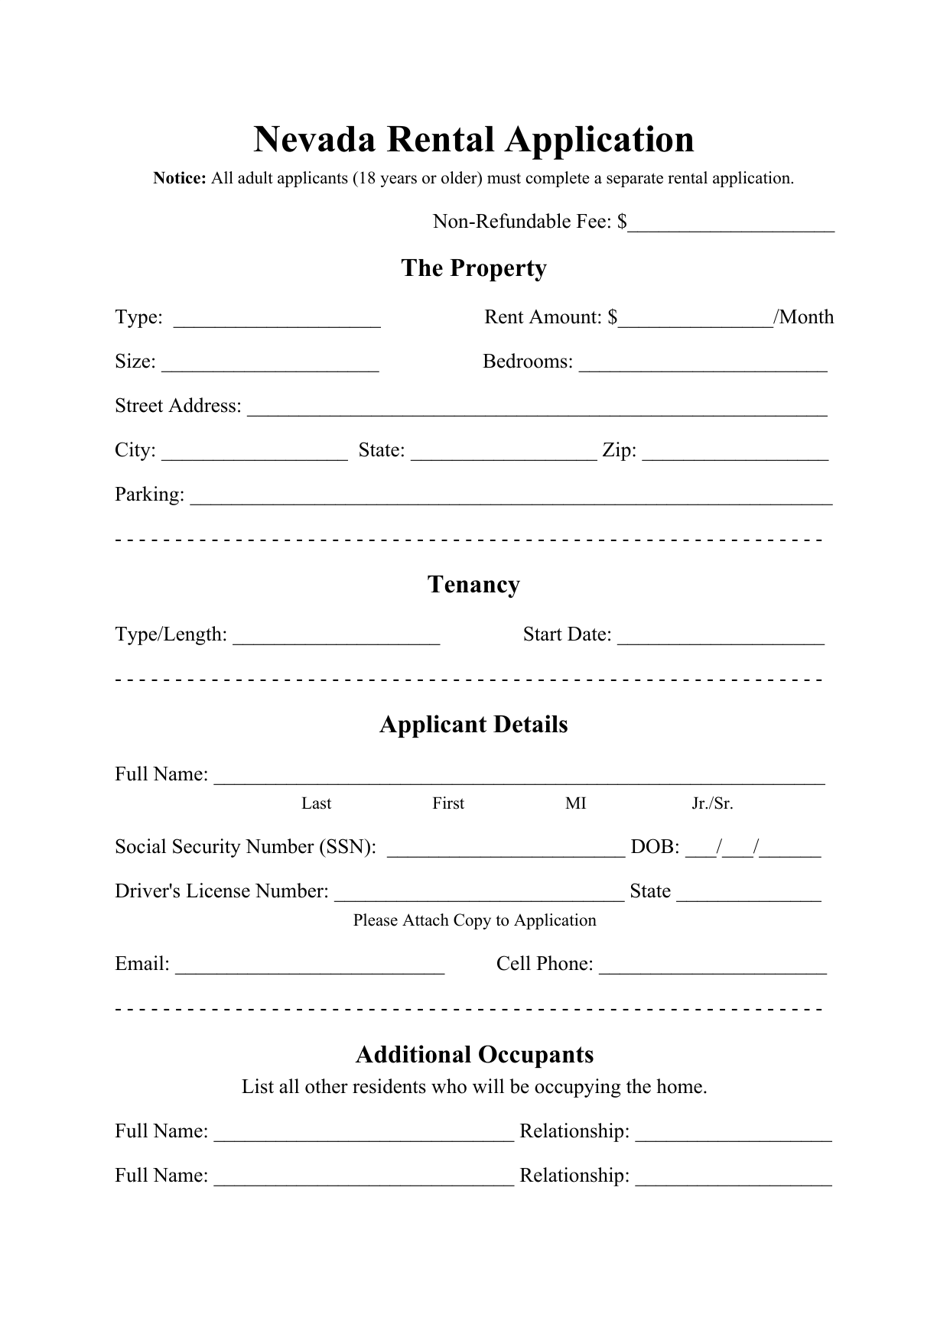 nevada-rental-application-form-fill-out-sign-online-and-download-pdf